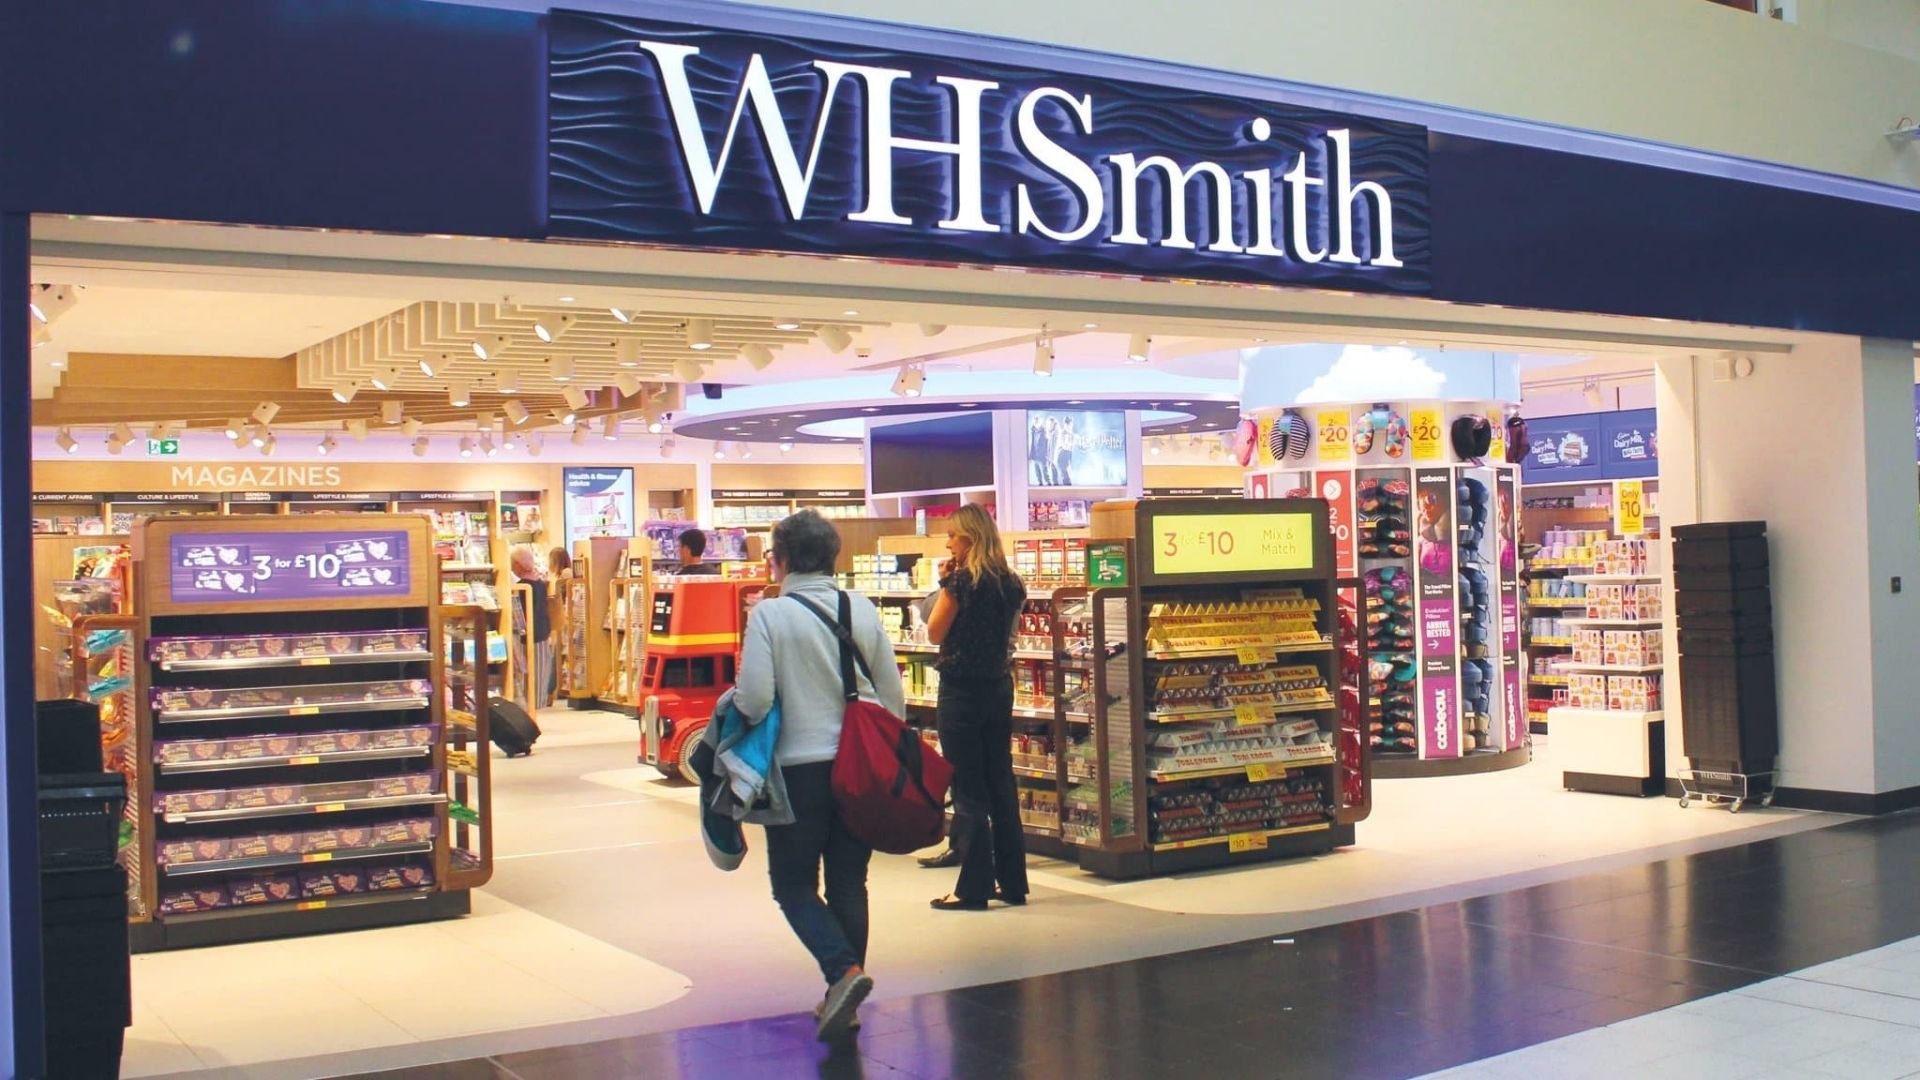 W H Smith, which has reported a “notably strong performance in the UK”